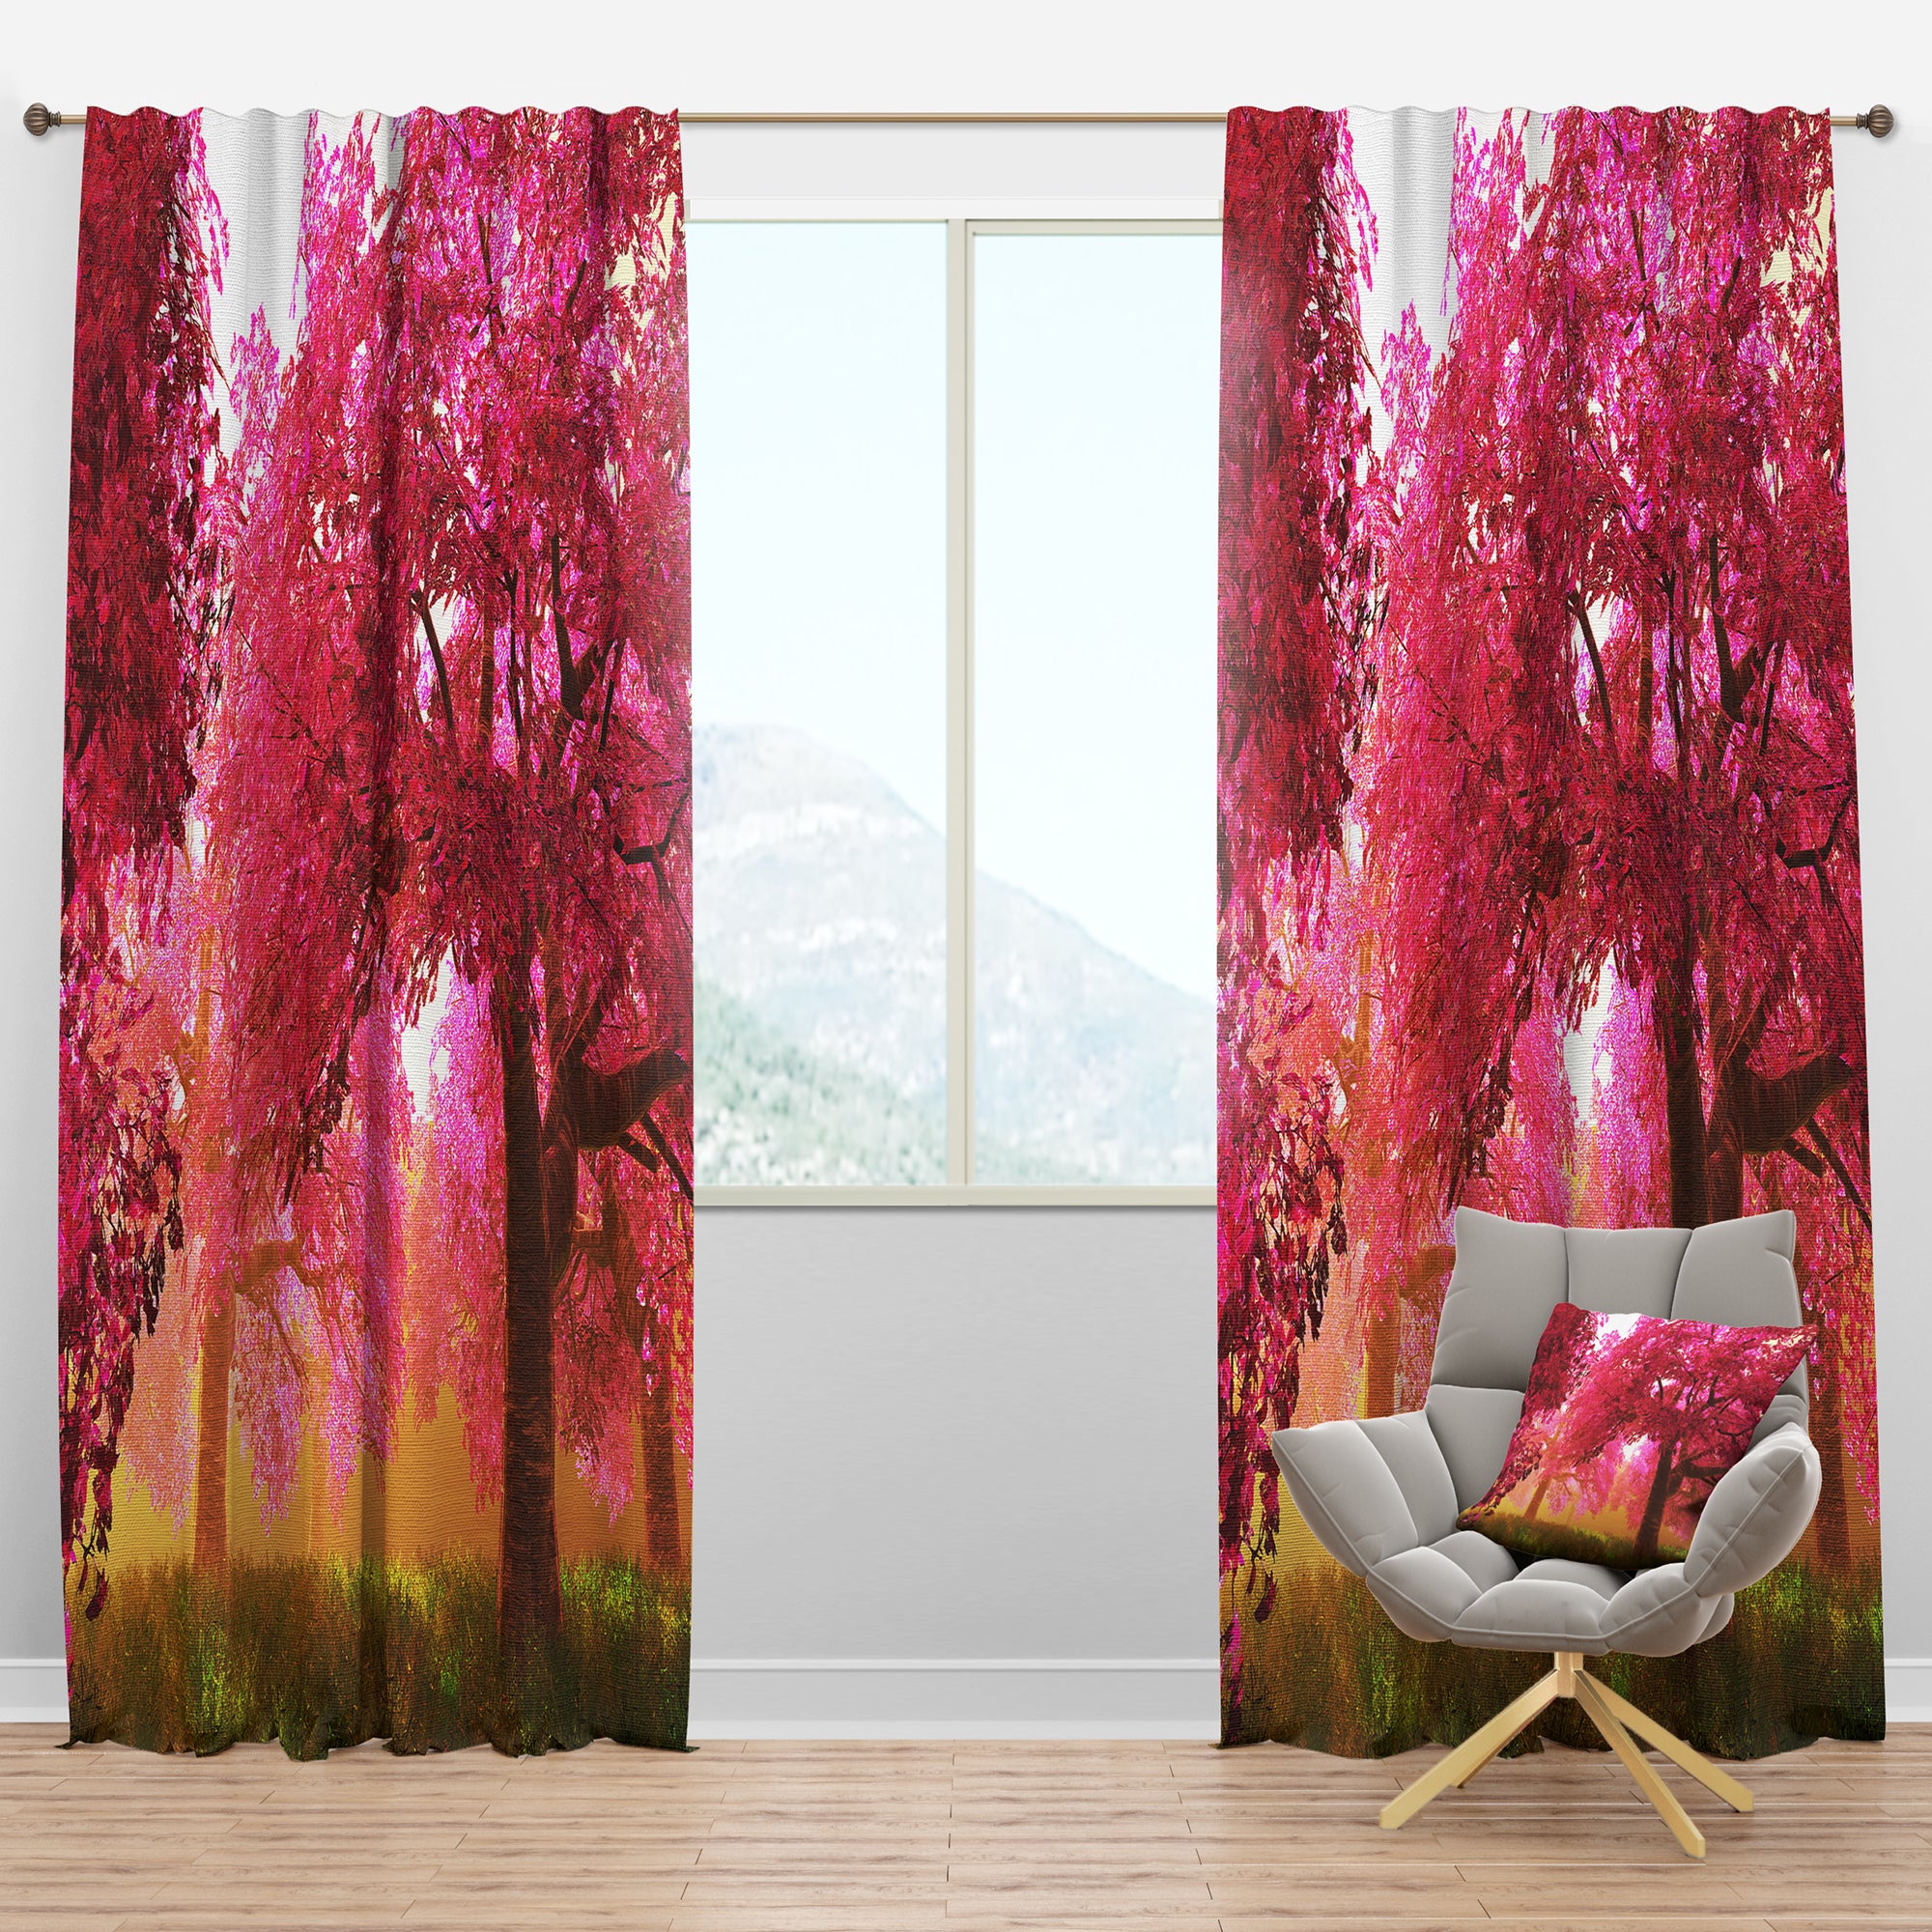 Designart 'Mysterious Red Cherry Blossoms' Landscape Curtain Panel